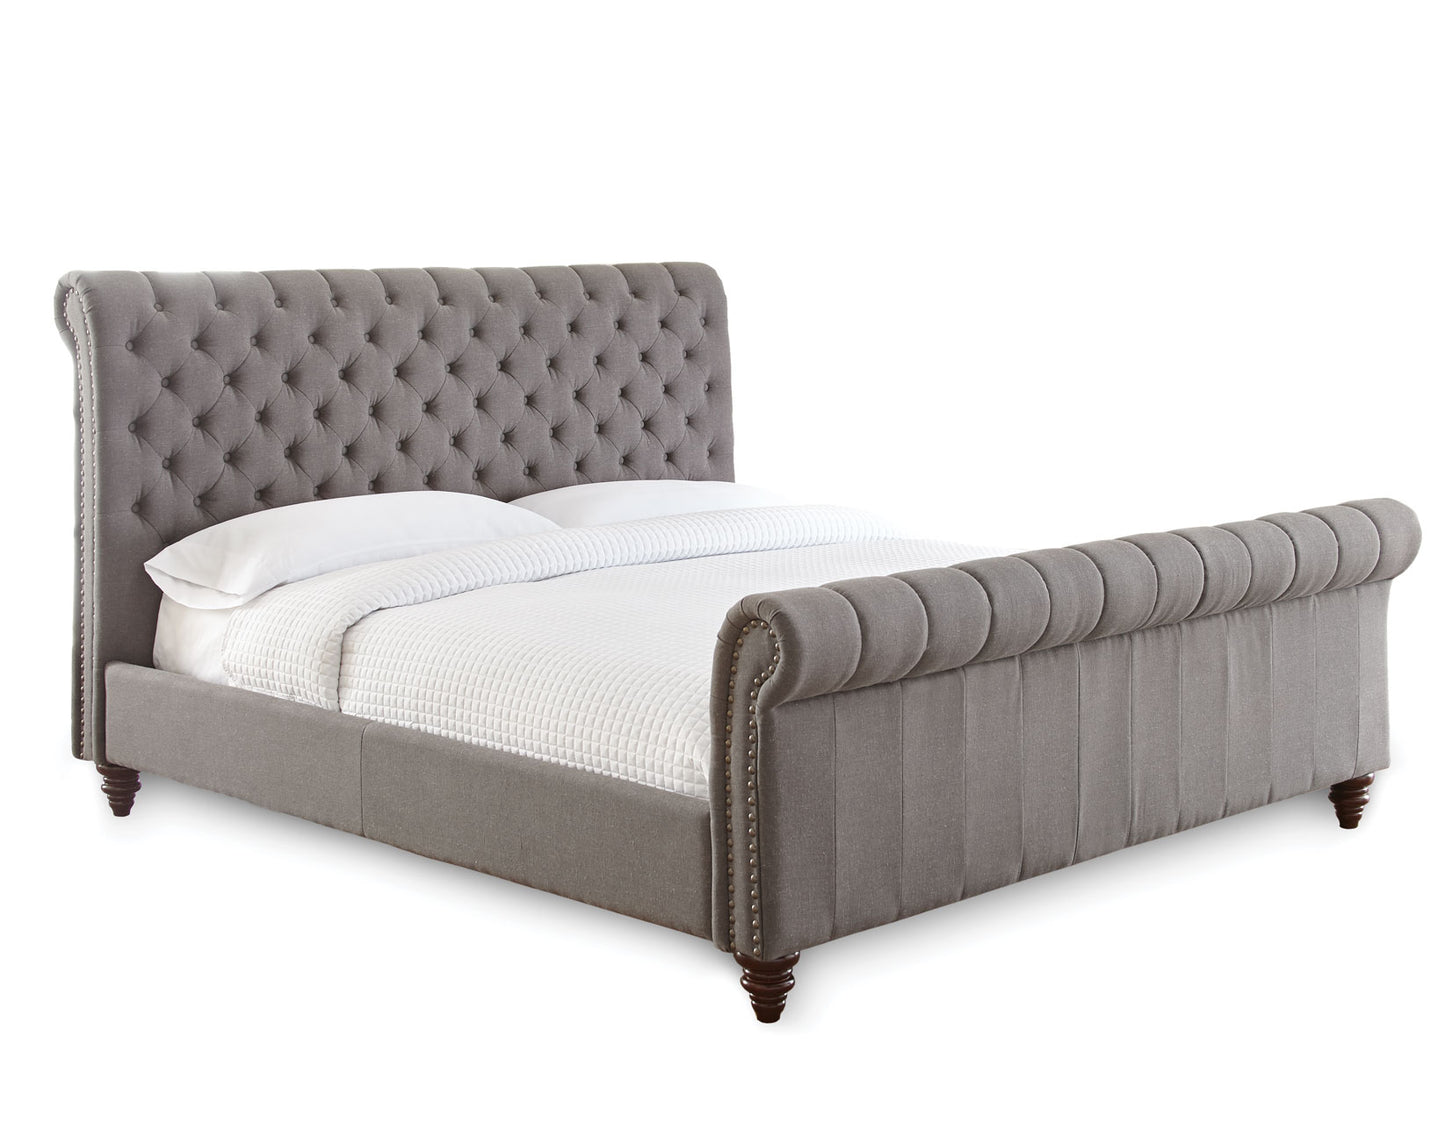 Swanson King Bed, Gray